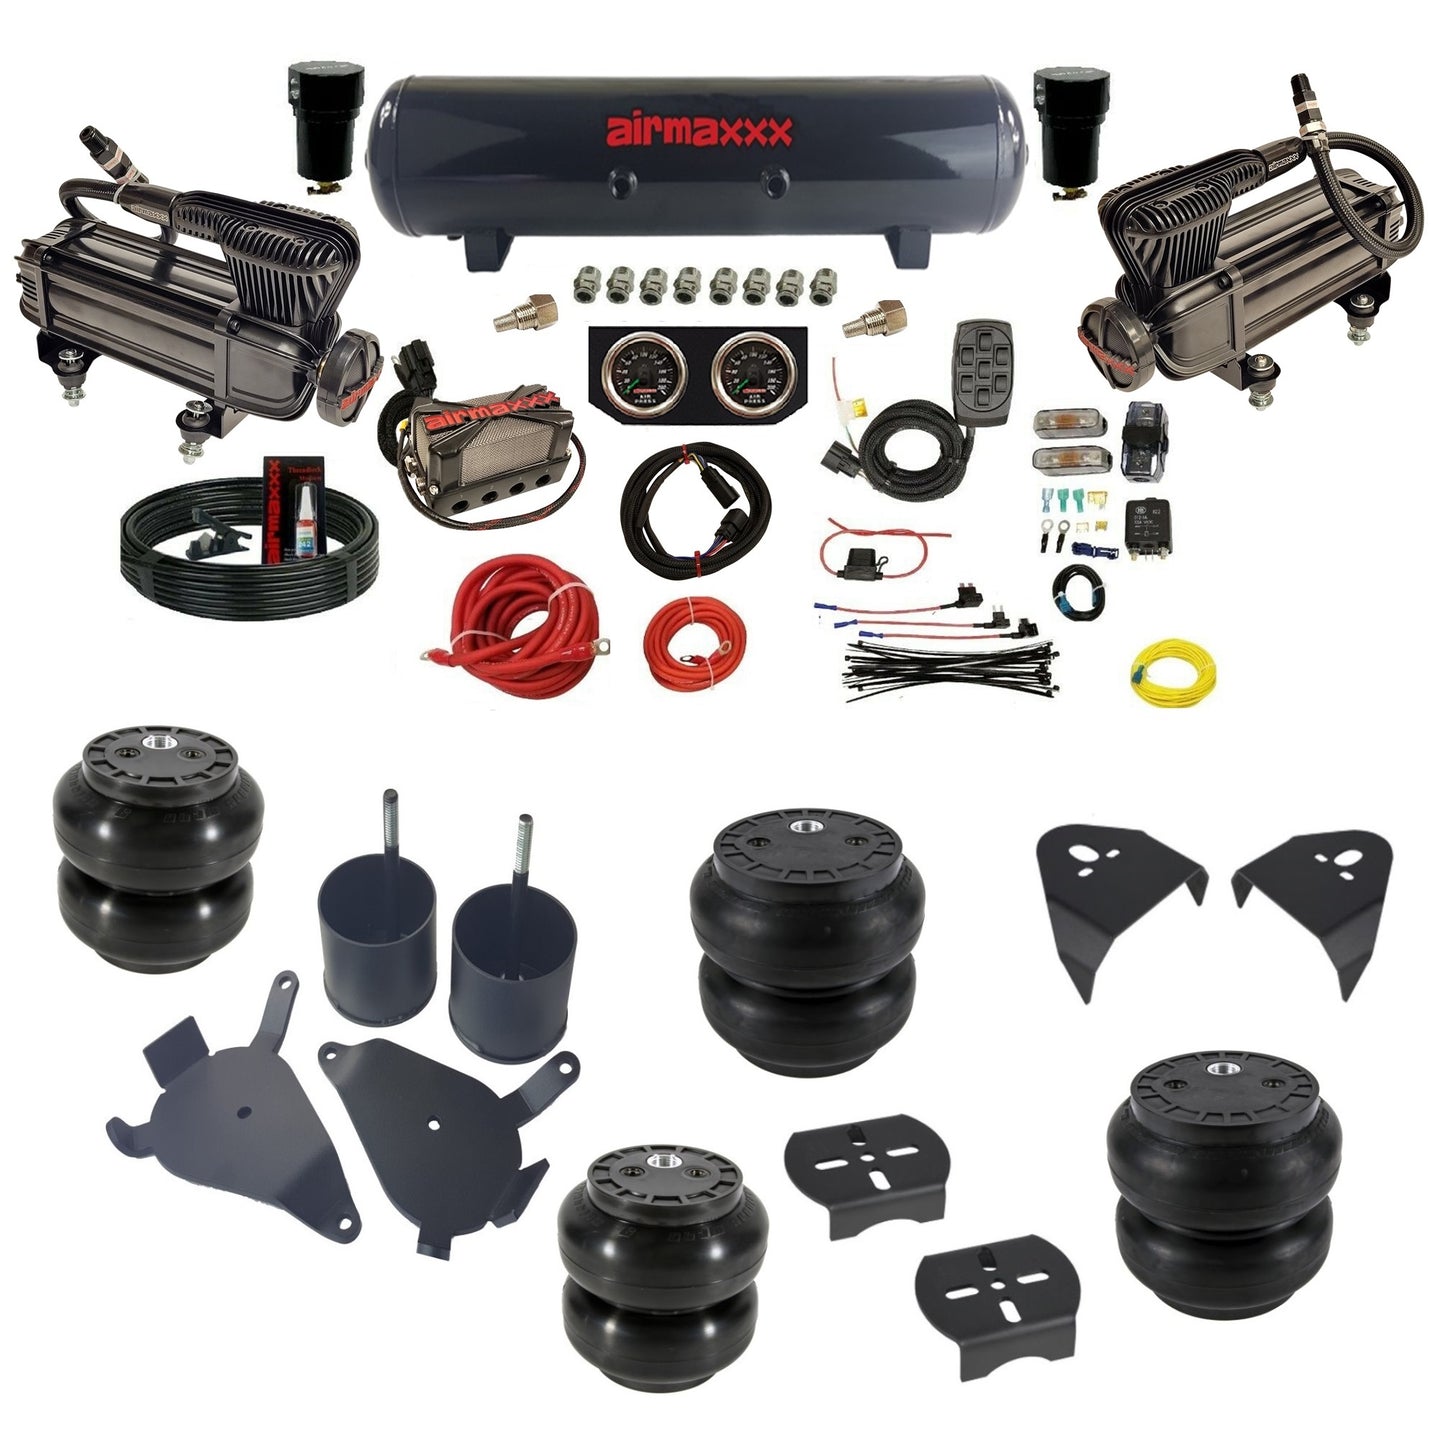 Complete Air Suspension Kit 3/8" Manifold Bags Blk 480 Fits 1982-05 S10 2wd